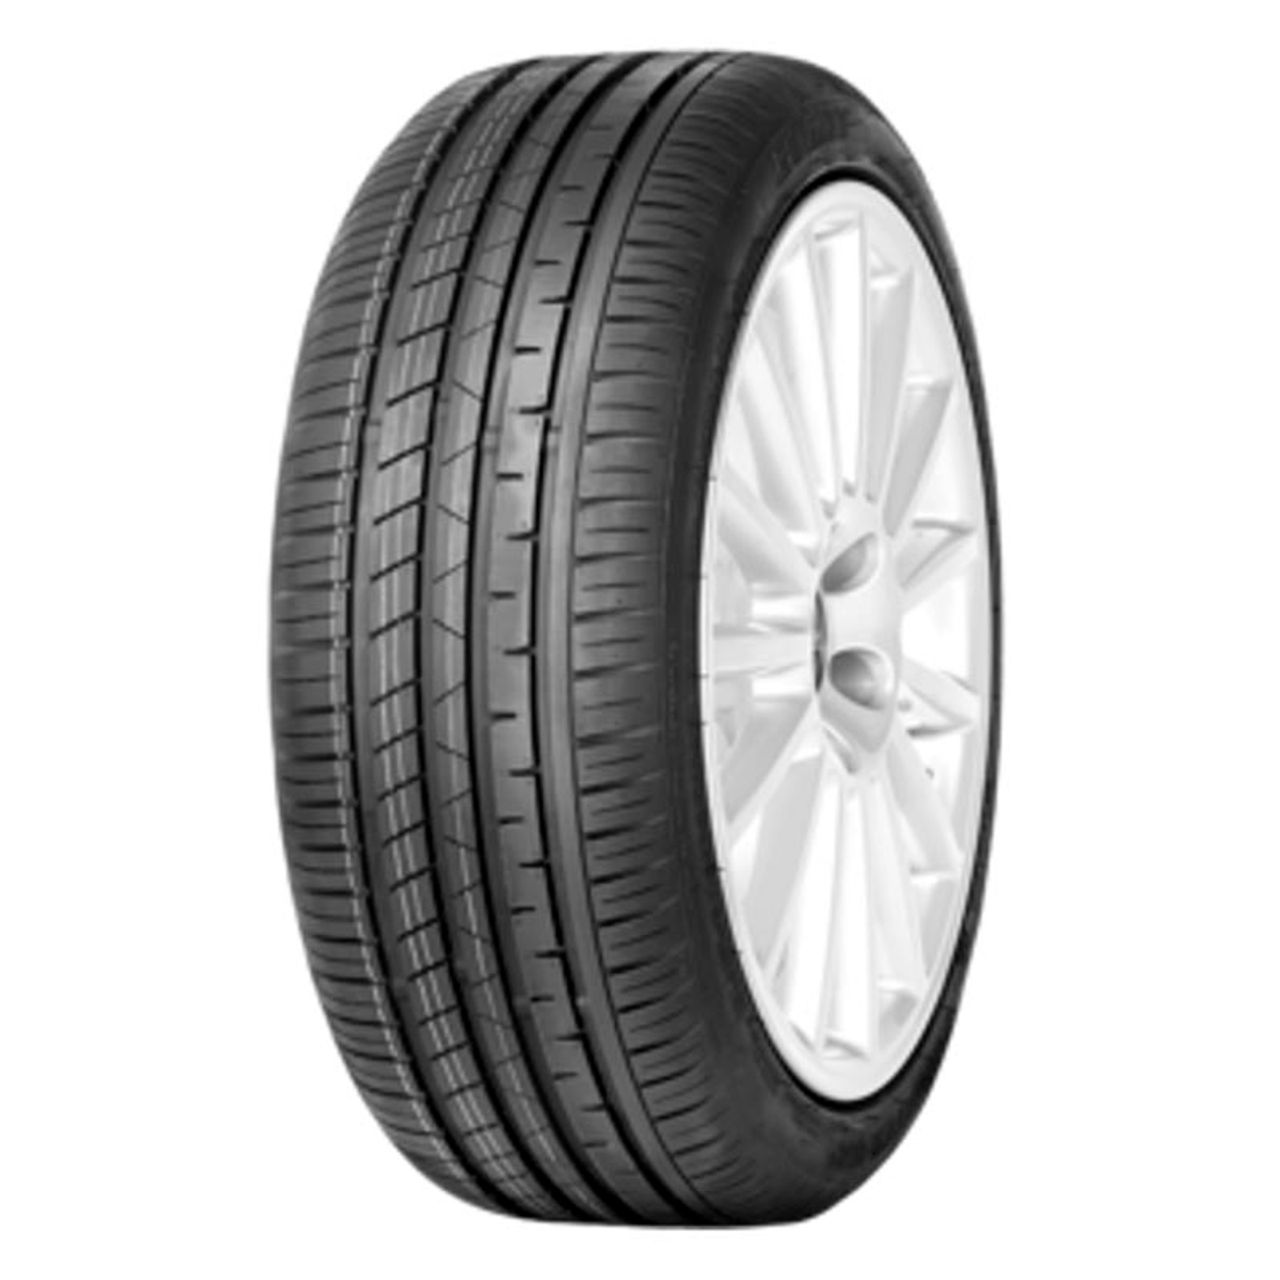 EVENT POTENTEM UHP 255/35R19 96W BSW XL